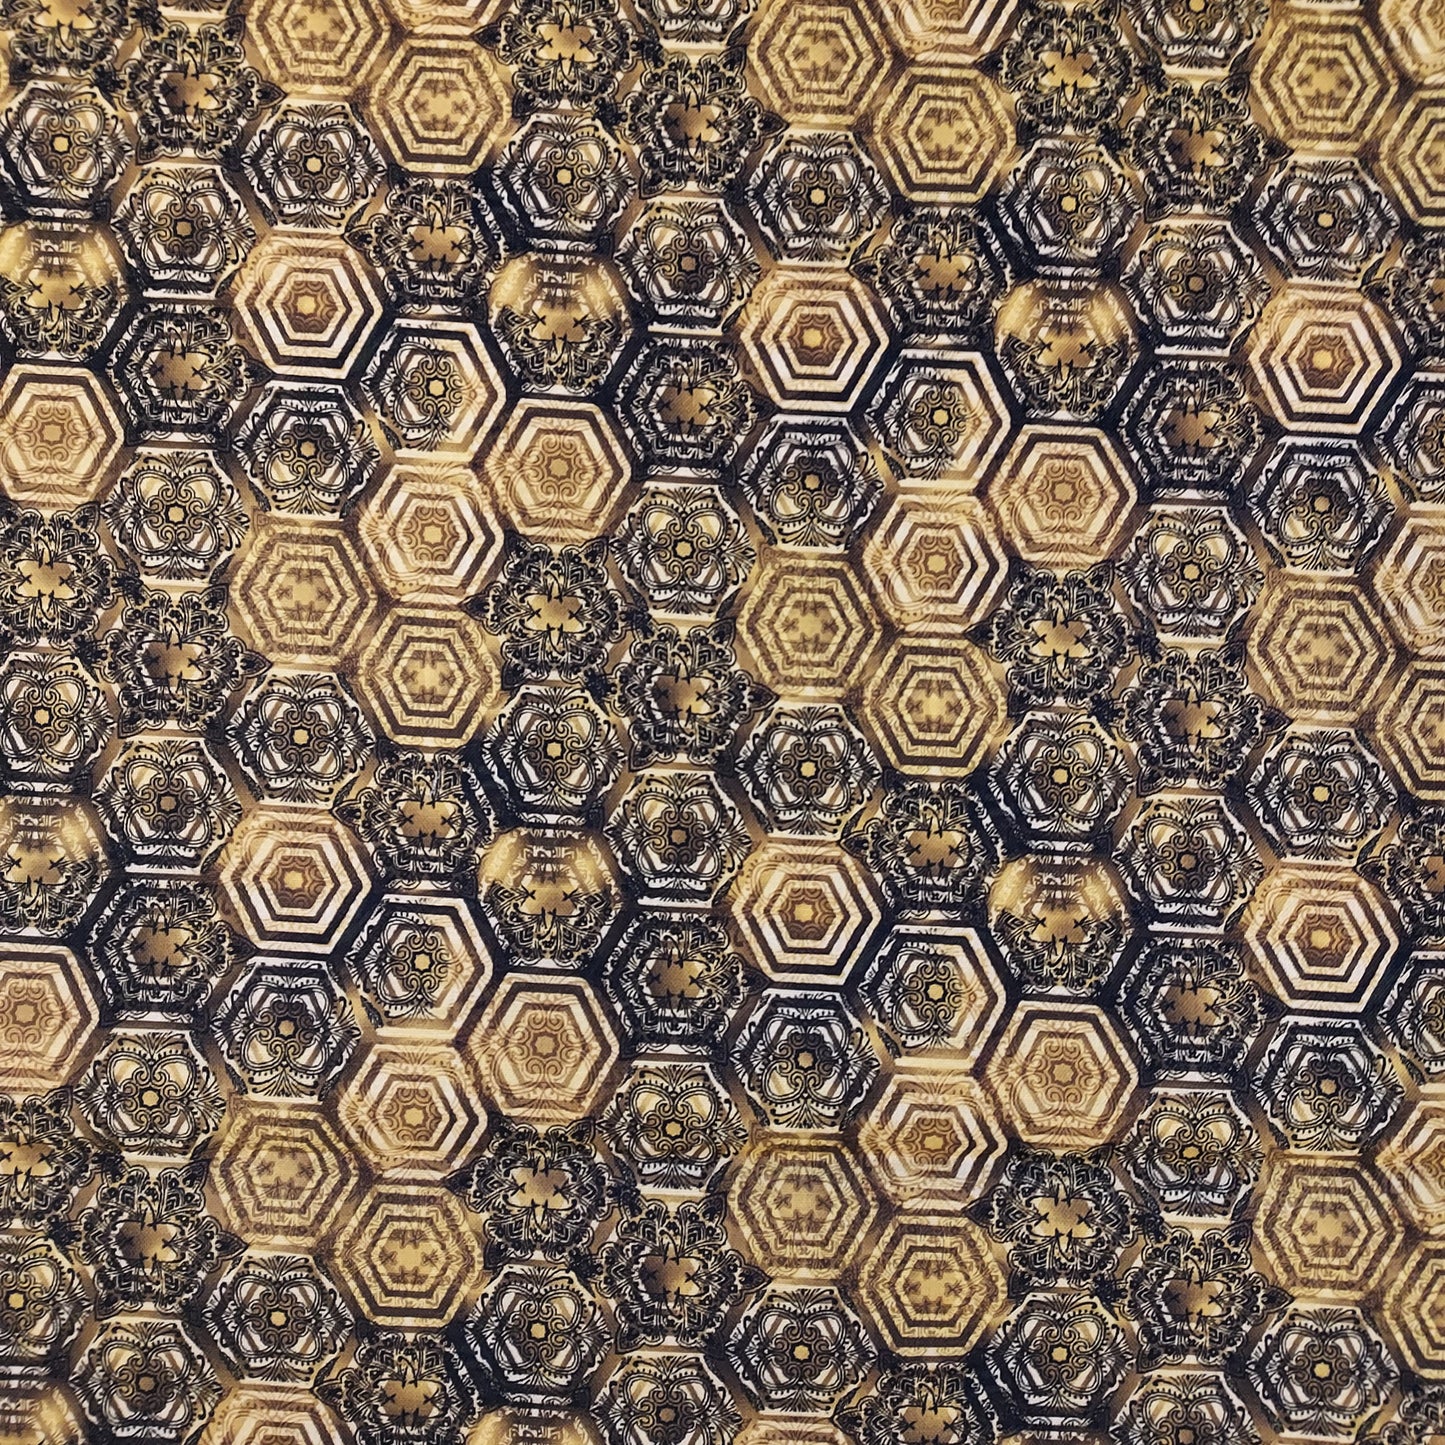 Timeless Treasures Honeycomb Bee Black and Gold Cotton Fabric